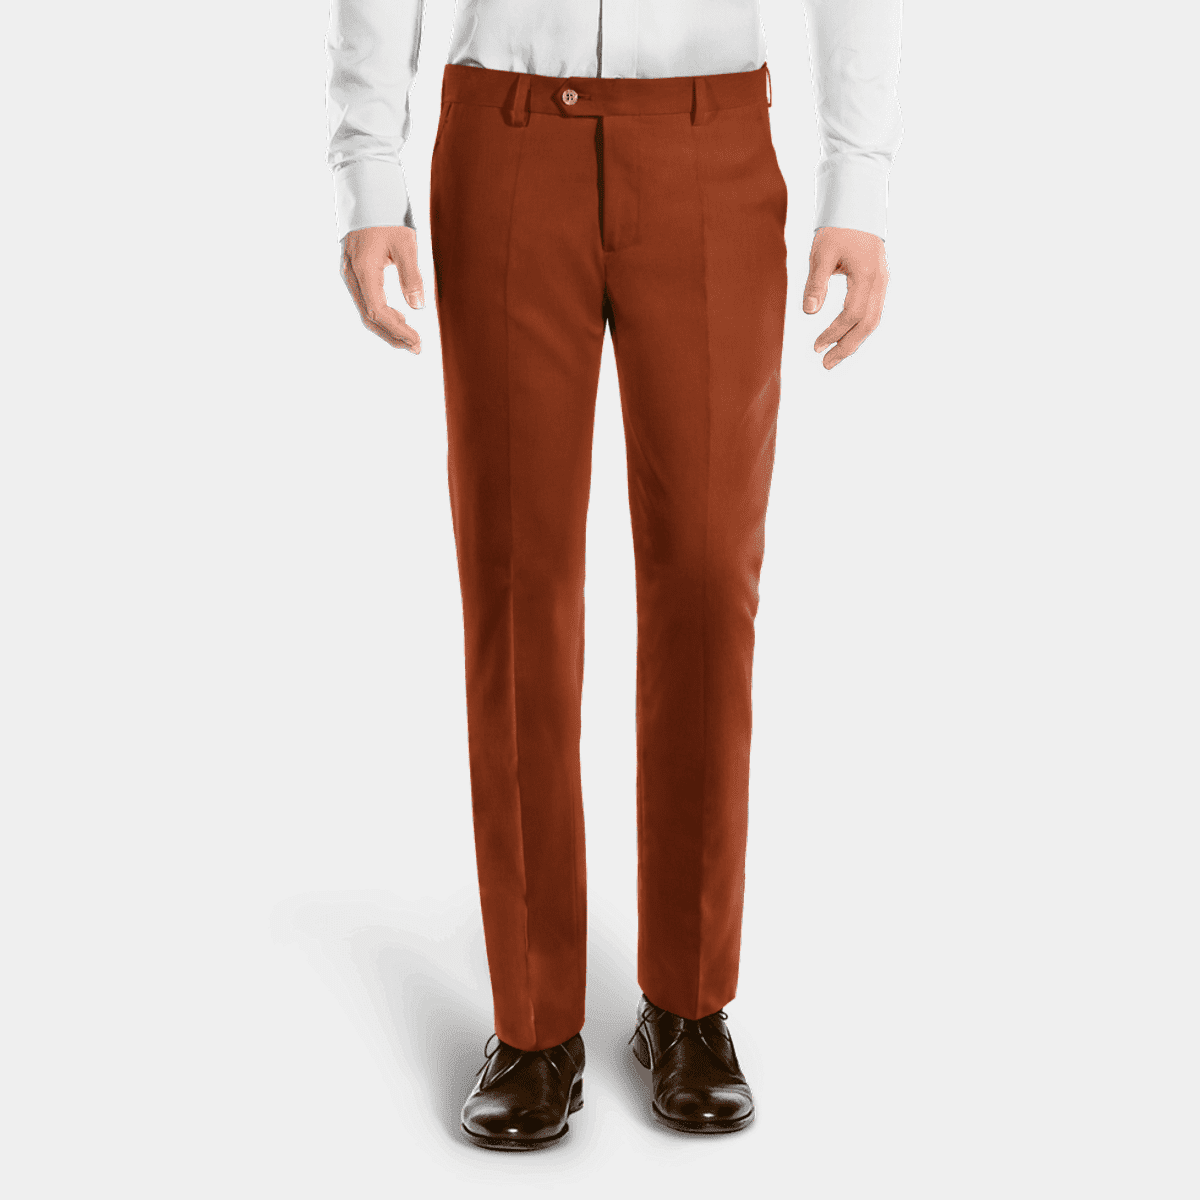 CYMMPU Men Solid Color Casual Pants Trousers Soft and Comfortable Cotton  Polyester Full Length Pants with Multipe Pocket in a Square Shape Orange  XXL - Walmart.com